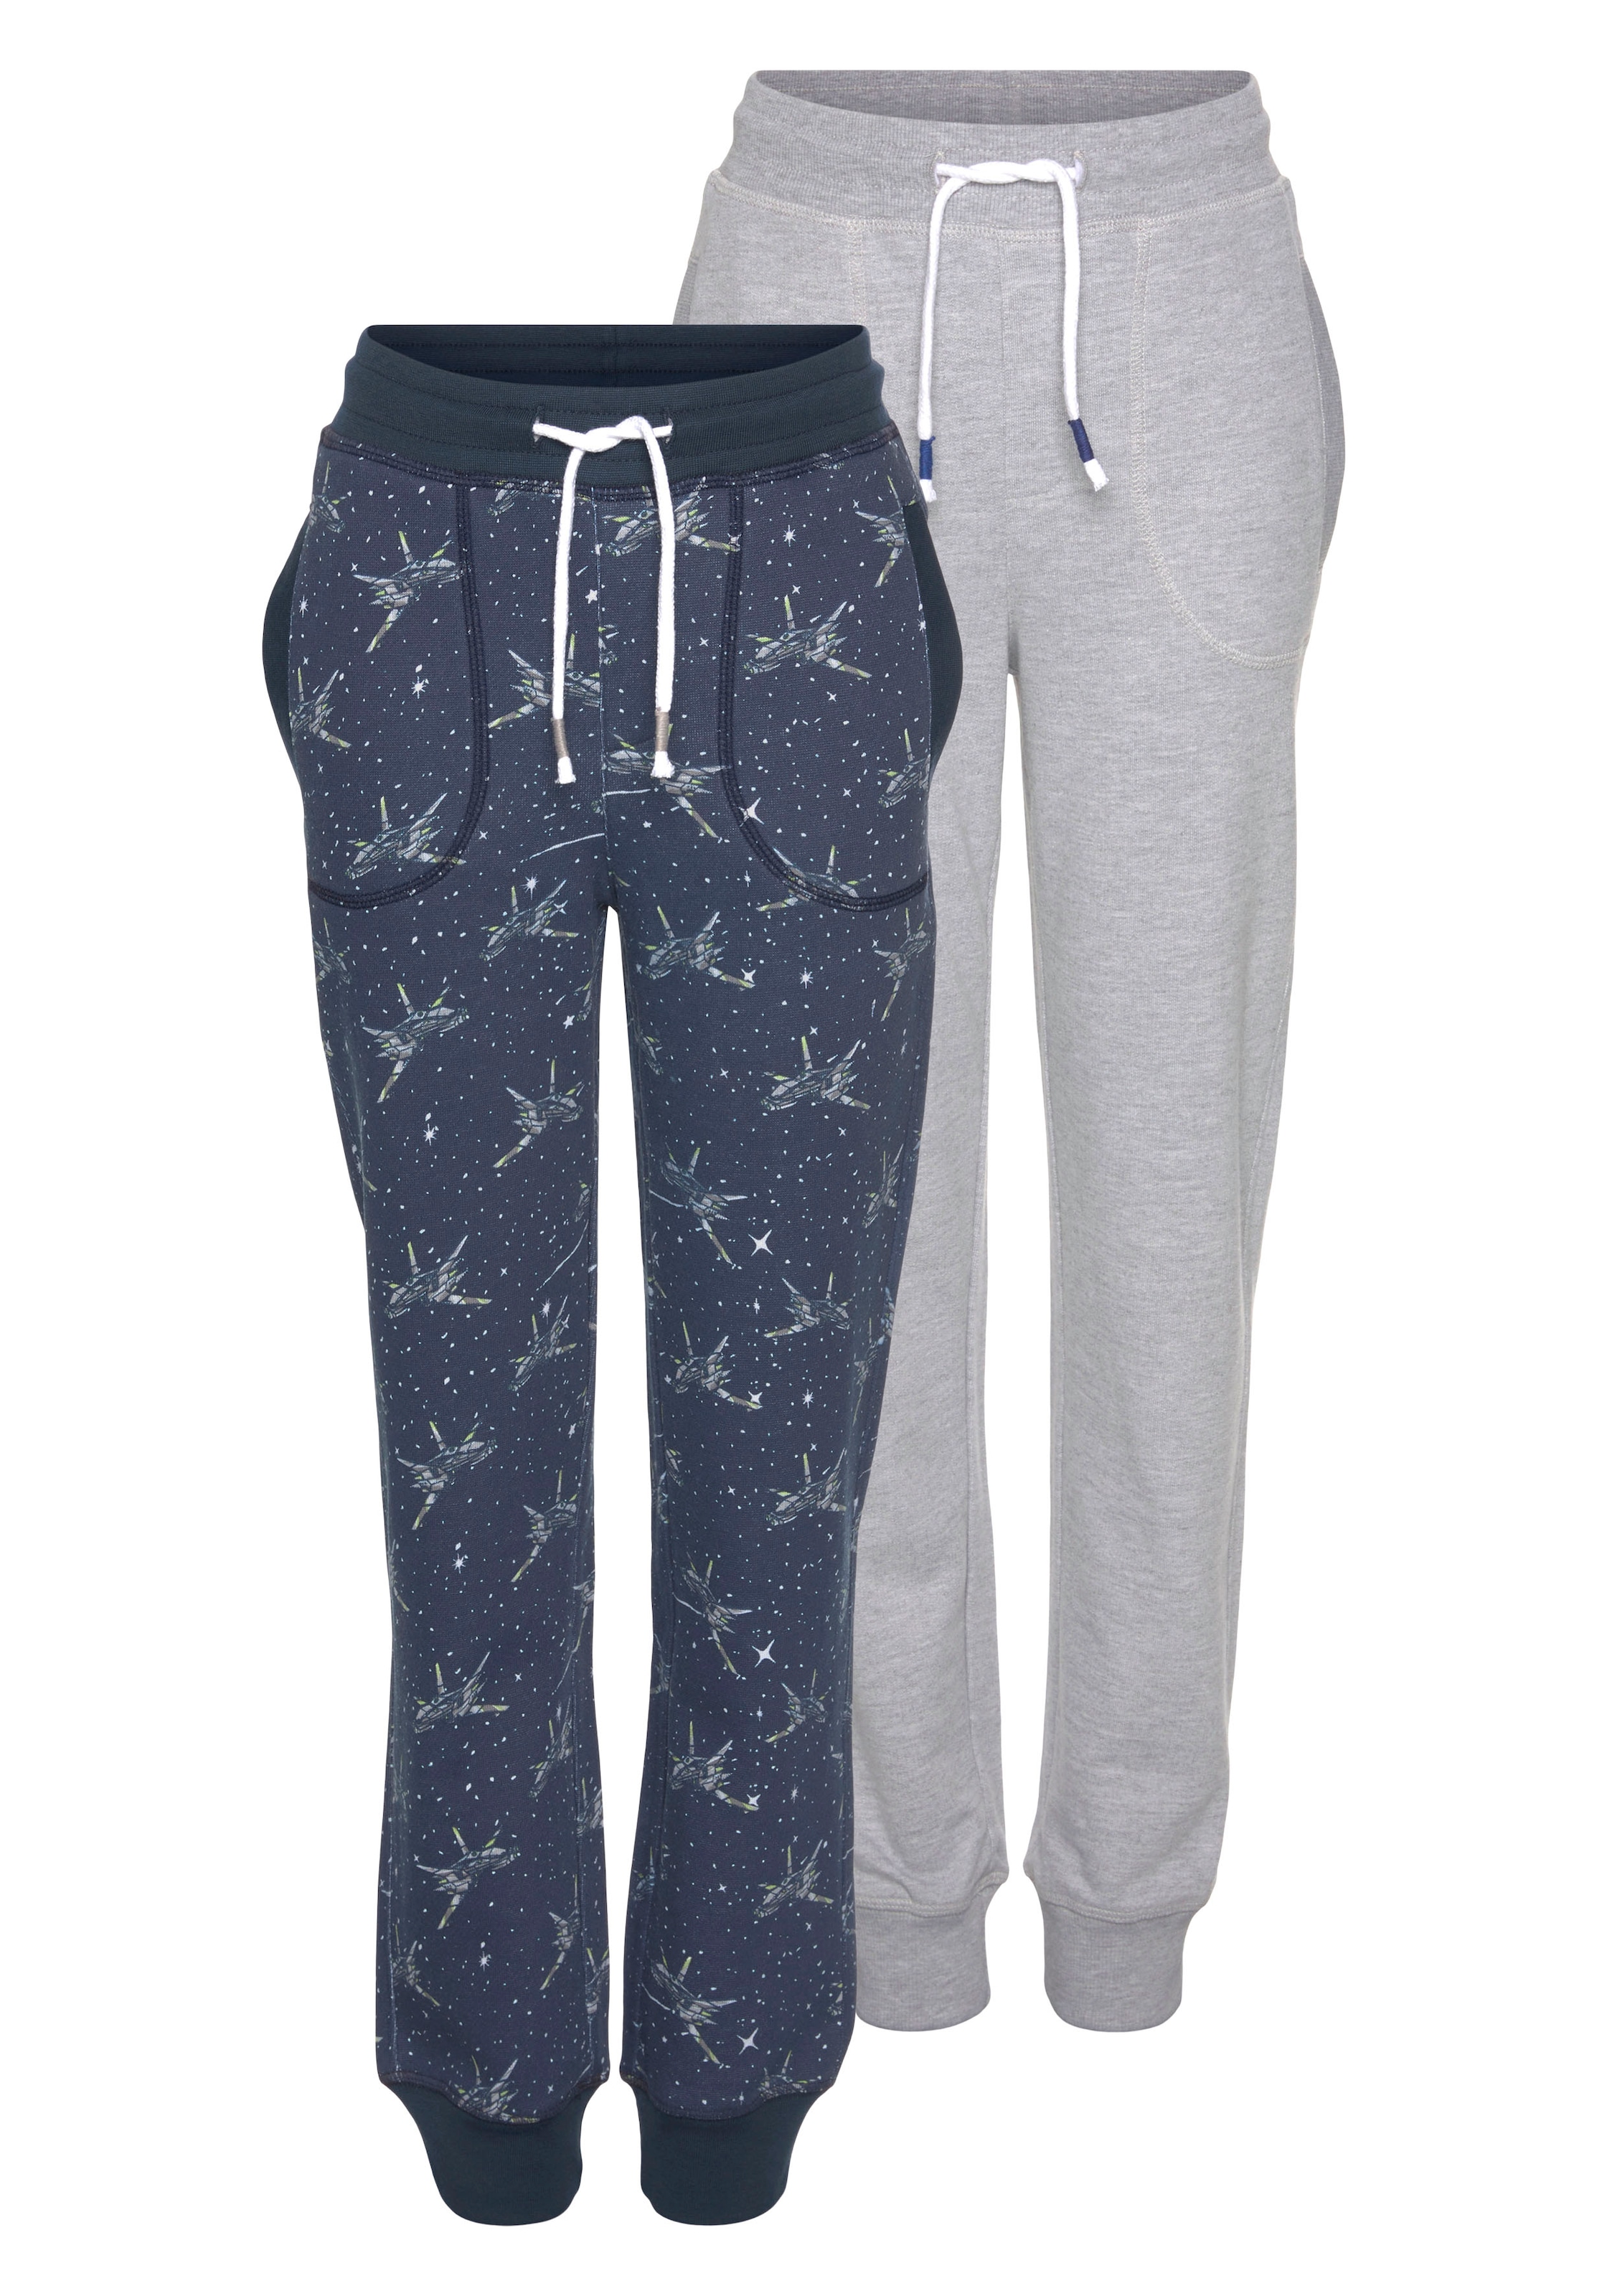 Scout Jogginghose »SPACE«, (Packung, 2er-Pack), aus bei Baumwollmischung OTTO online